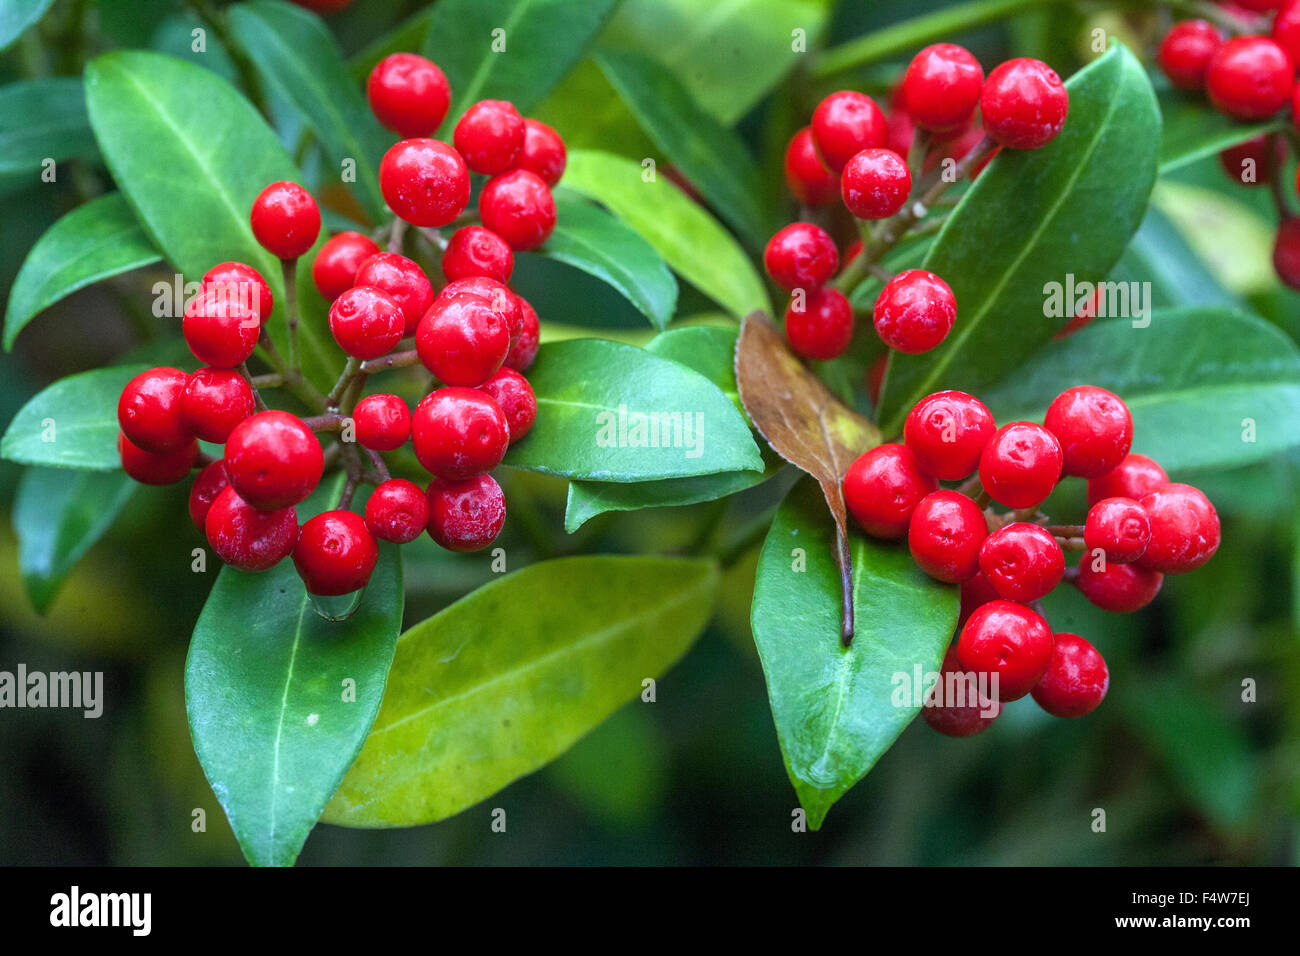 Skimmia japonica evergreen shrub with red berries Plant Stock Photo